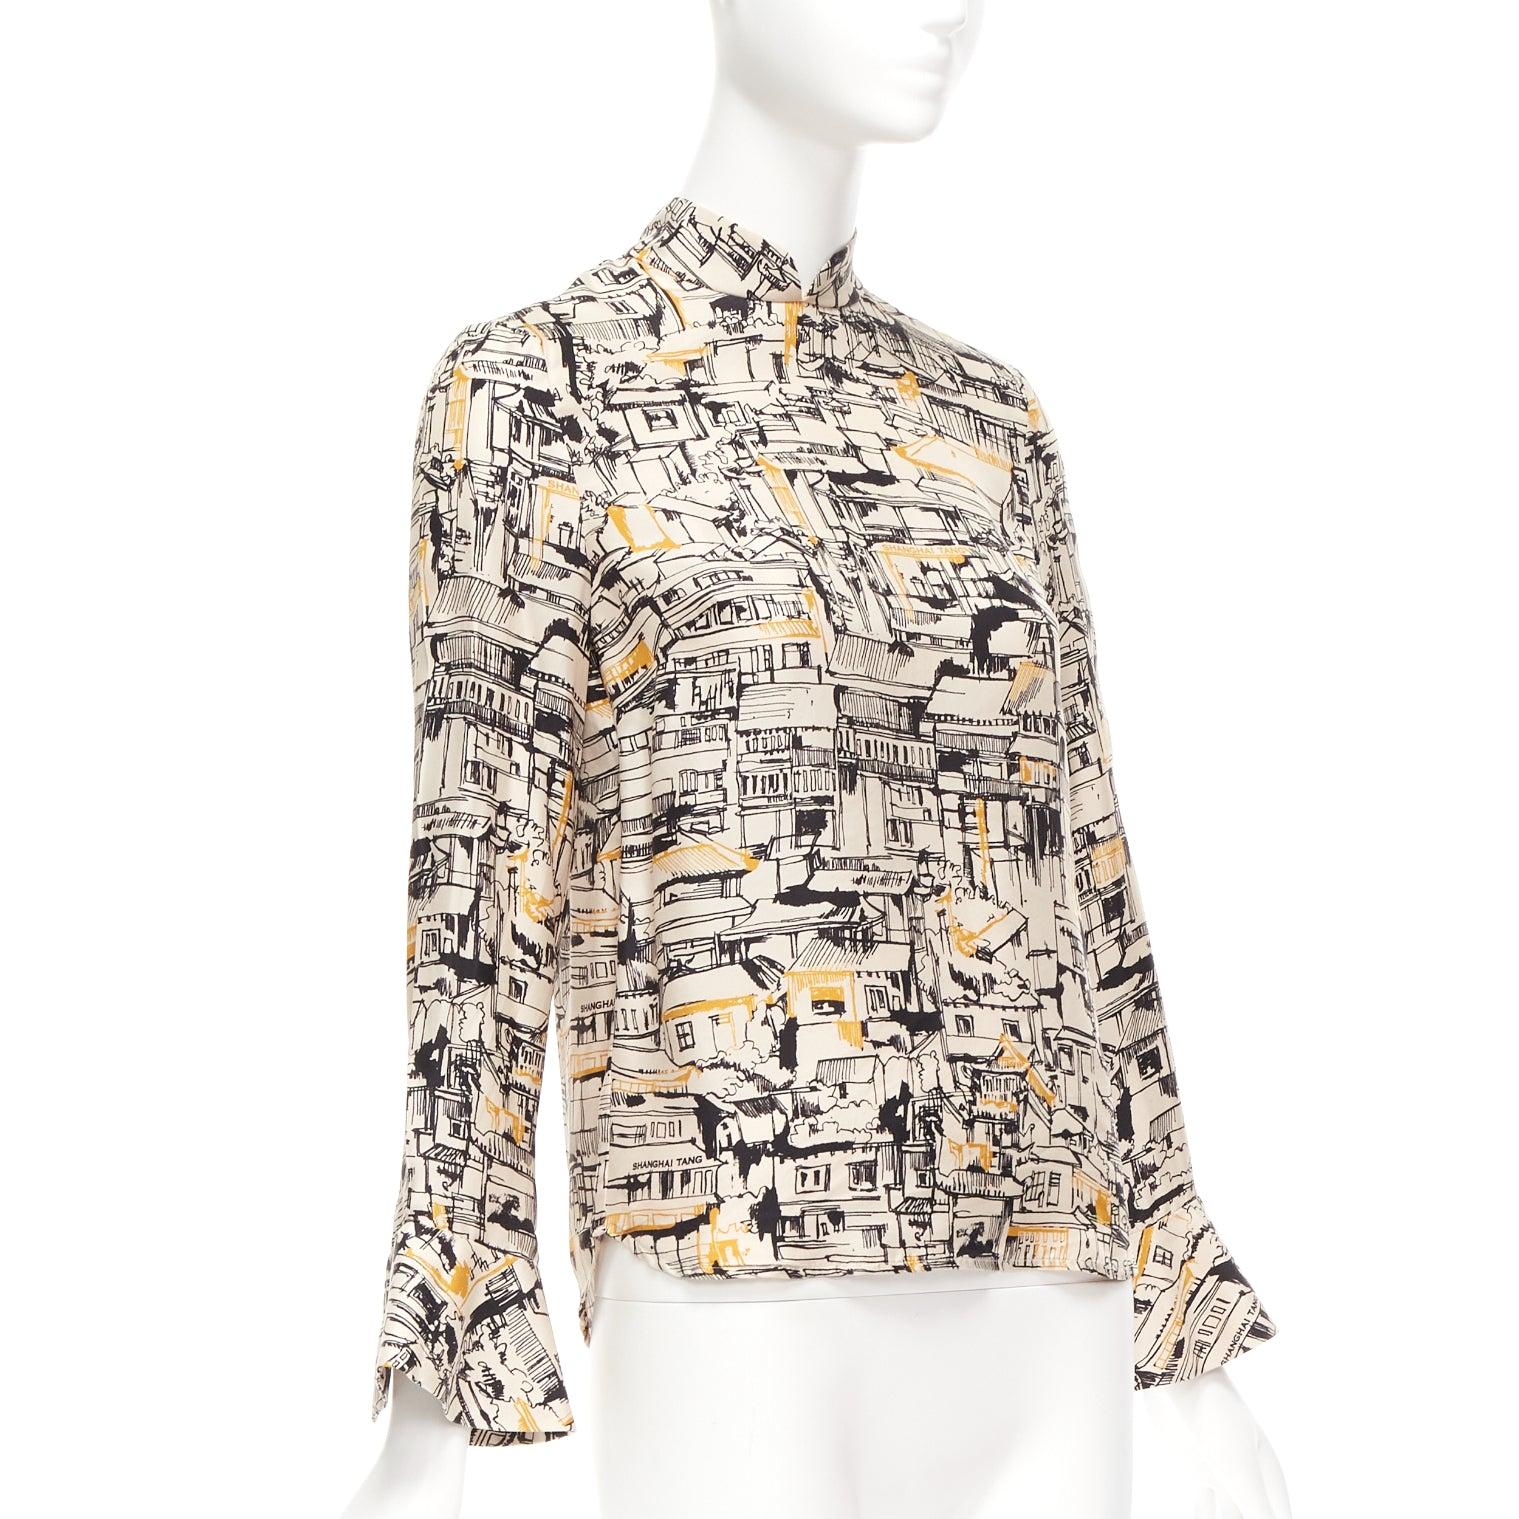 SHANGHAI TANG 100% silk beige village house print chinese collar blouse FR36 S
Reference: CELG/A00390
Brand: Vivienne Tam
Material: Silk
Color: Beige, Multicolour
Pattern: Abstract
Closure: Zip
Extra Details: Back zip with ST logo zipper head.
Made